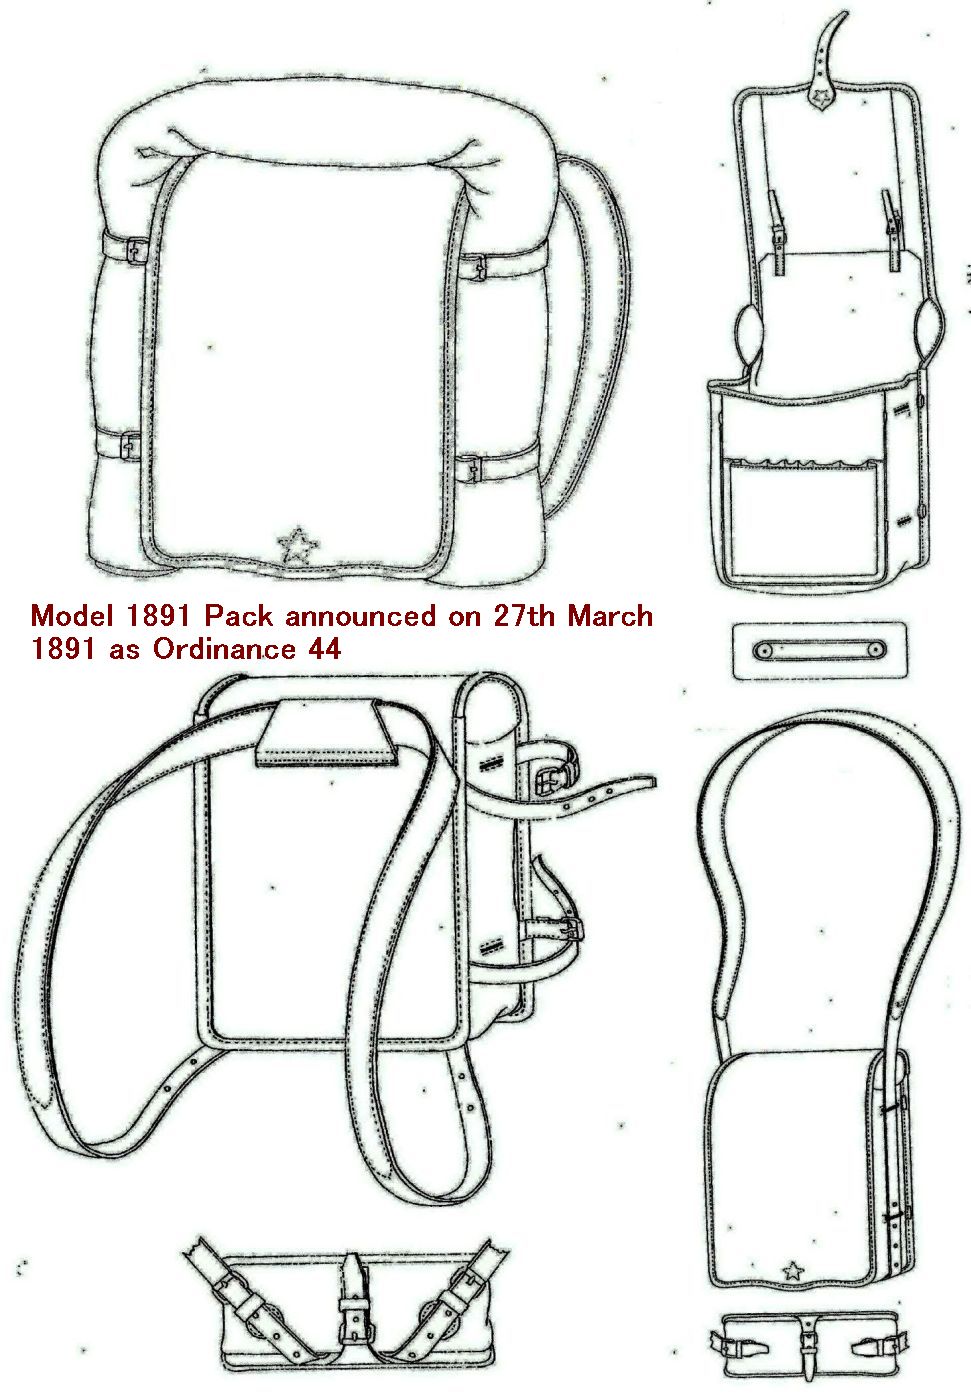 The Evolution of the Japanese Imperial Army Backpacks (1874-1945) - Page 2